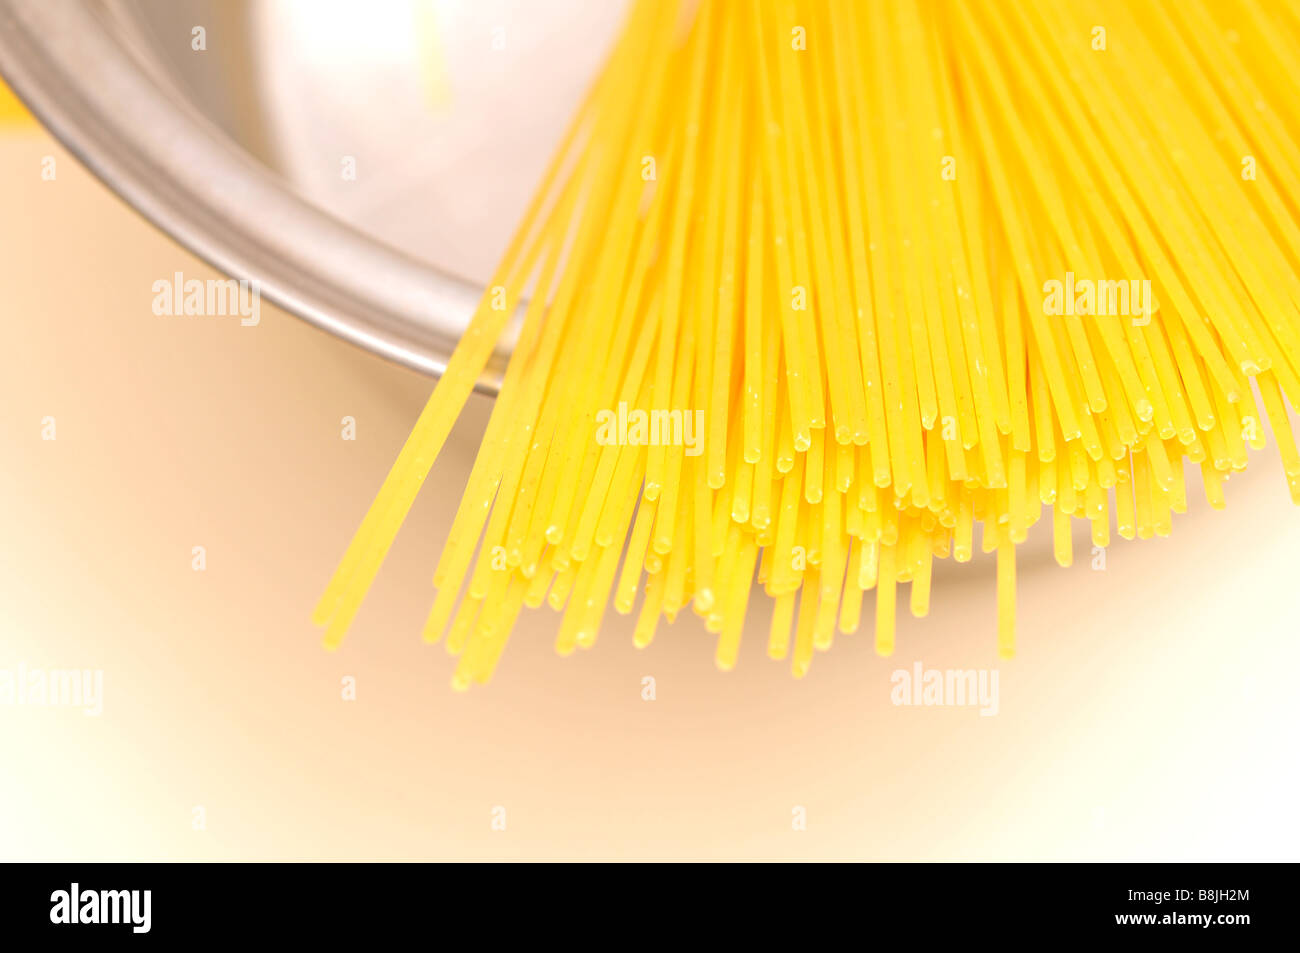 dried spaghetti in stainless steel pan pasta Stock Photo